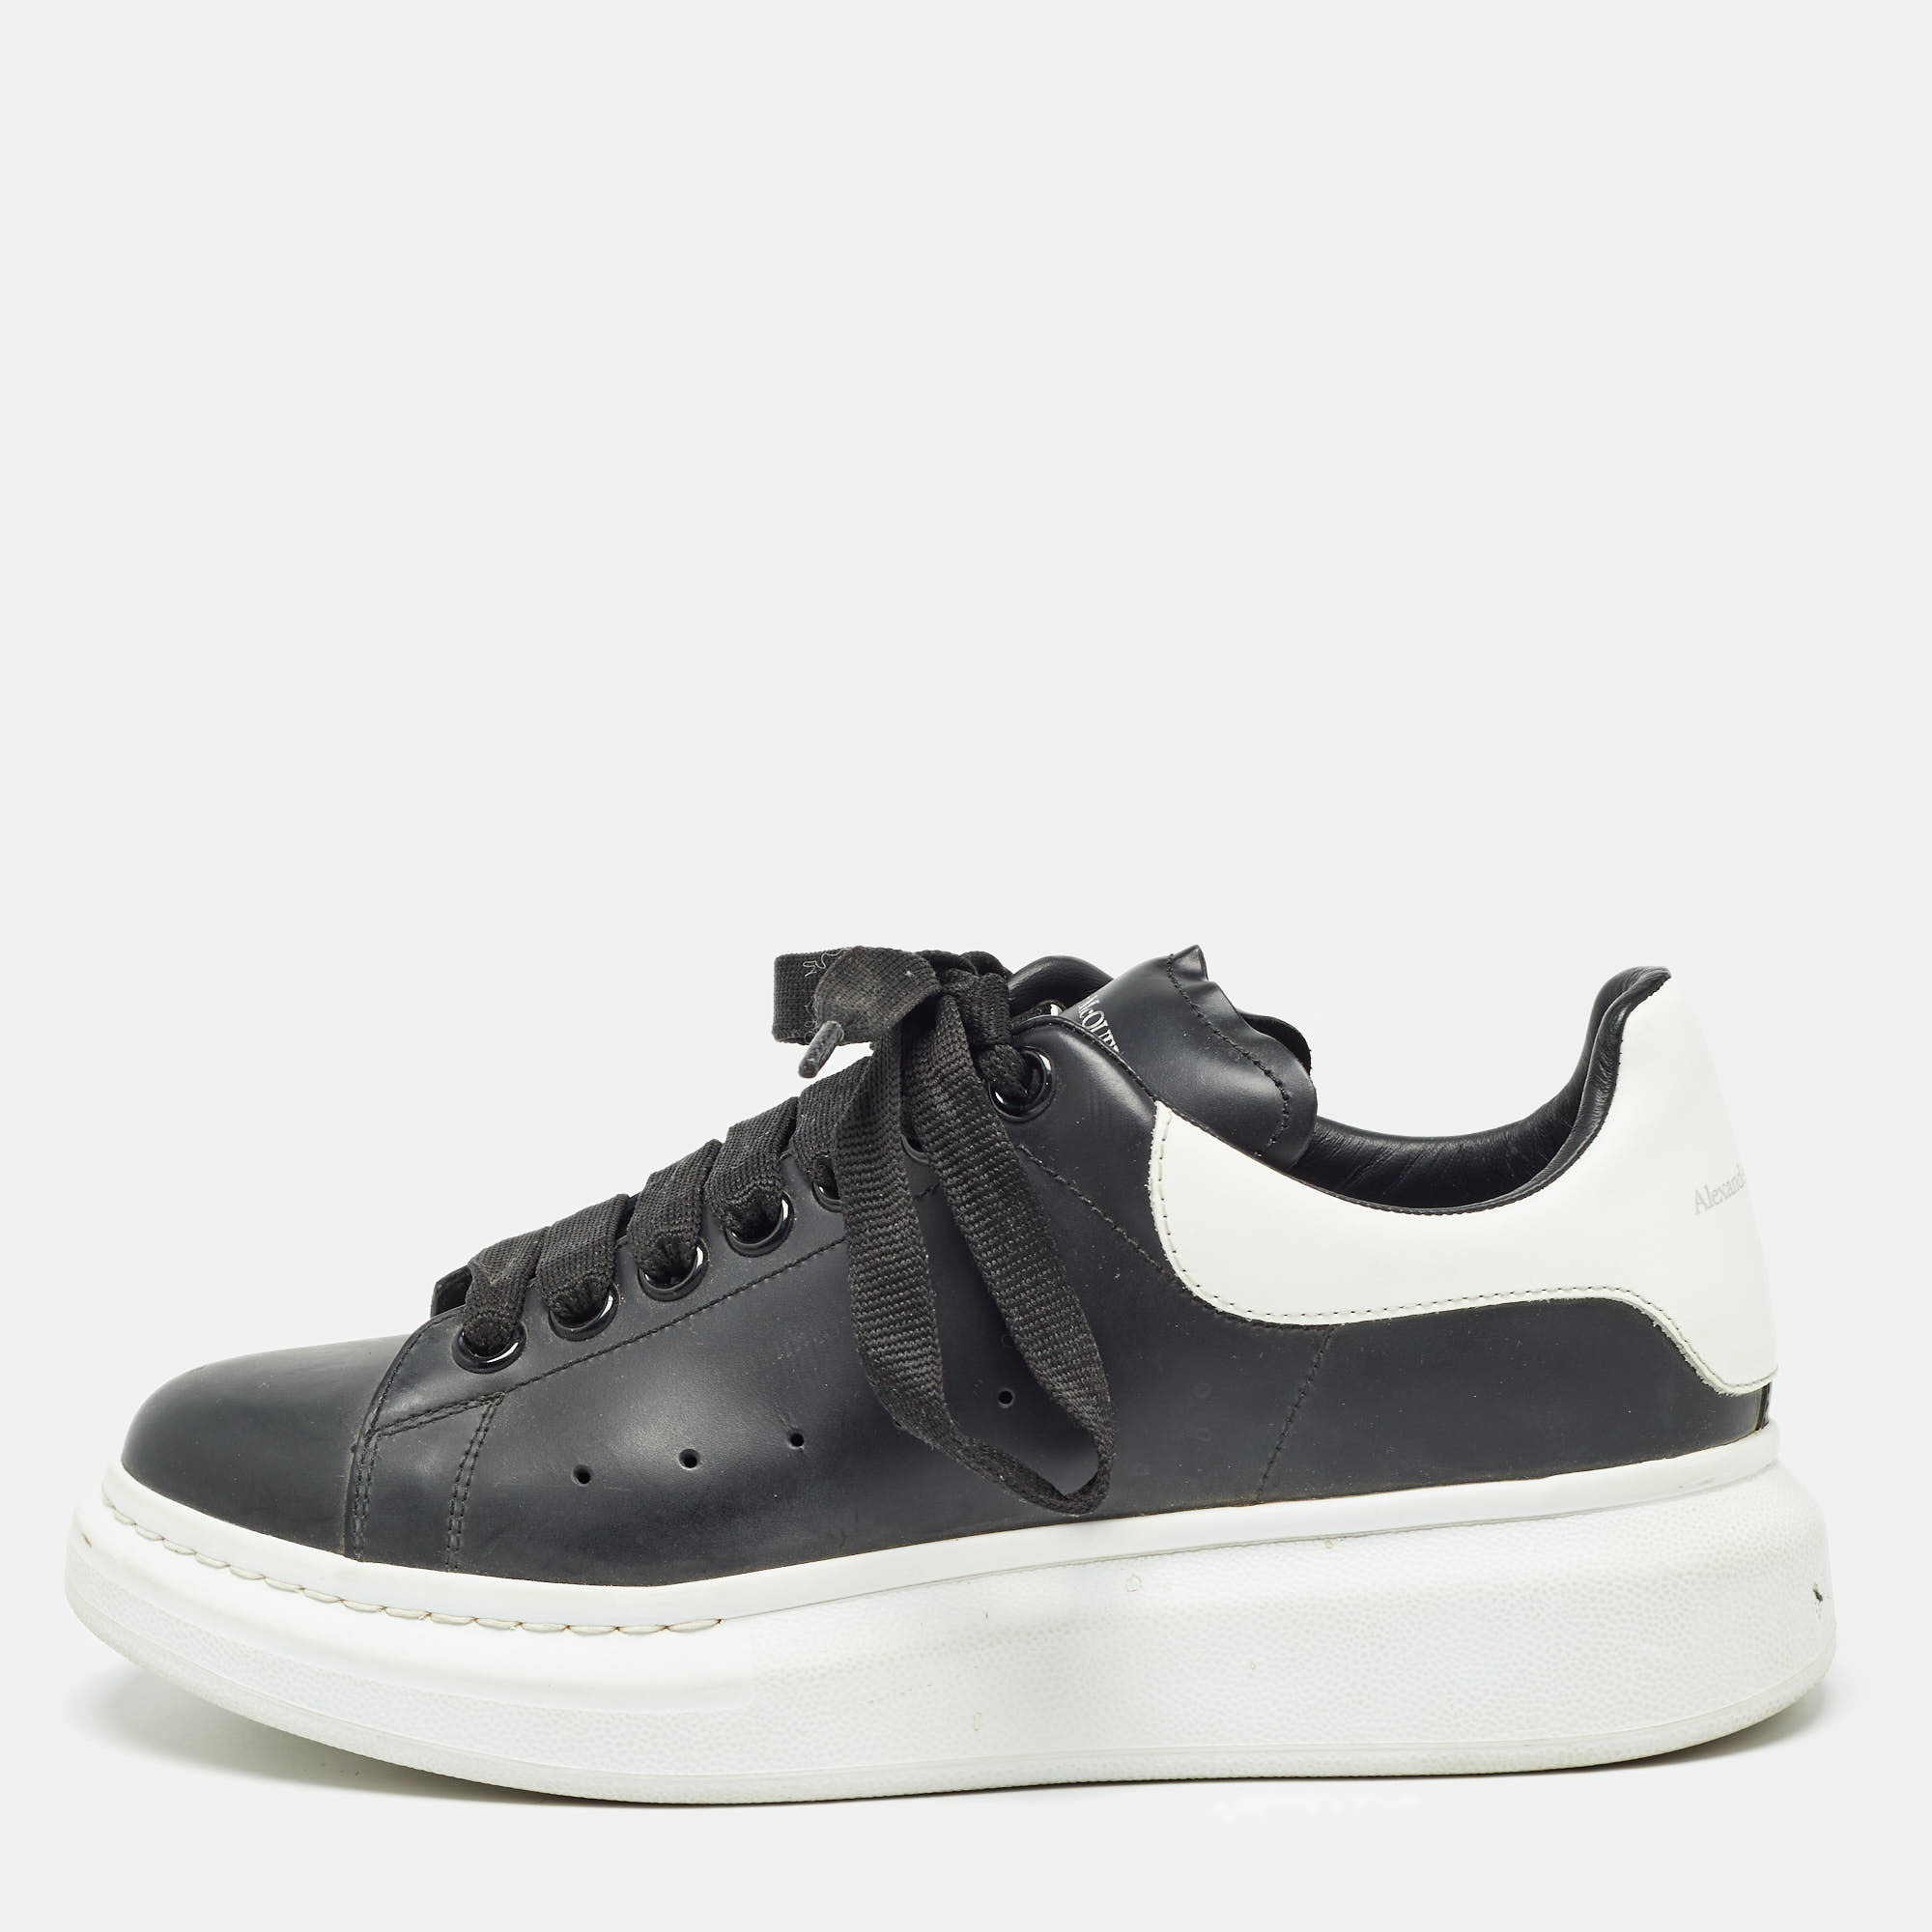 Alexander mcqueen black/white leather oversized sneakers size 38